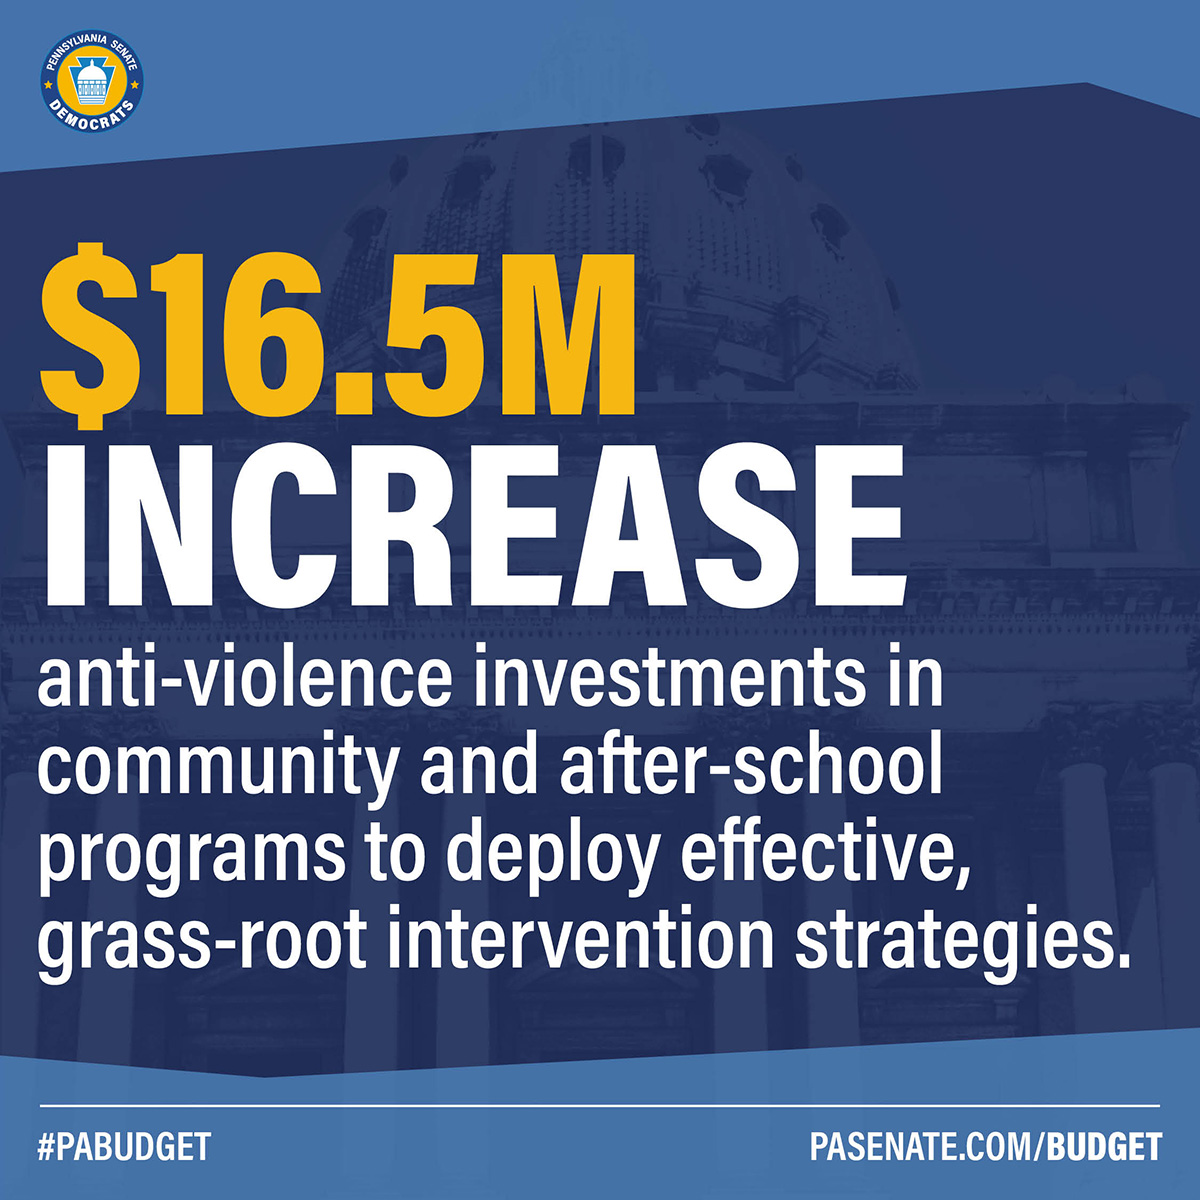 $16.5M increase for anti-violence investments in community and after-school programs to deploy effective, grass-root intervention strategies